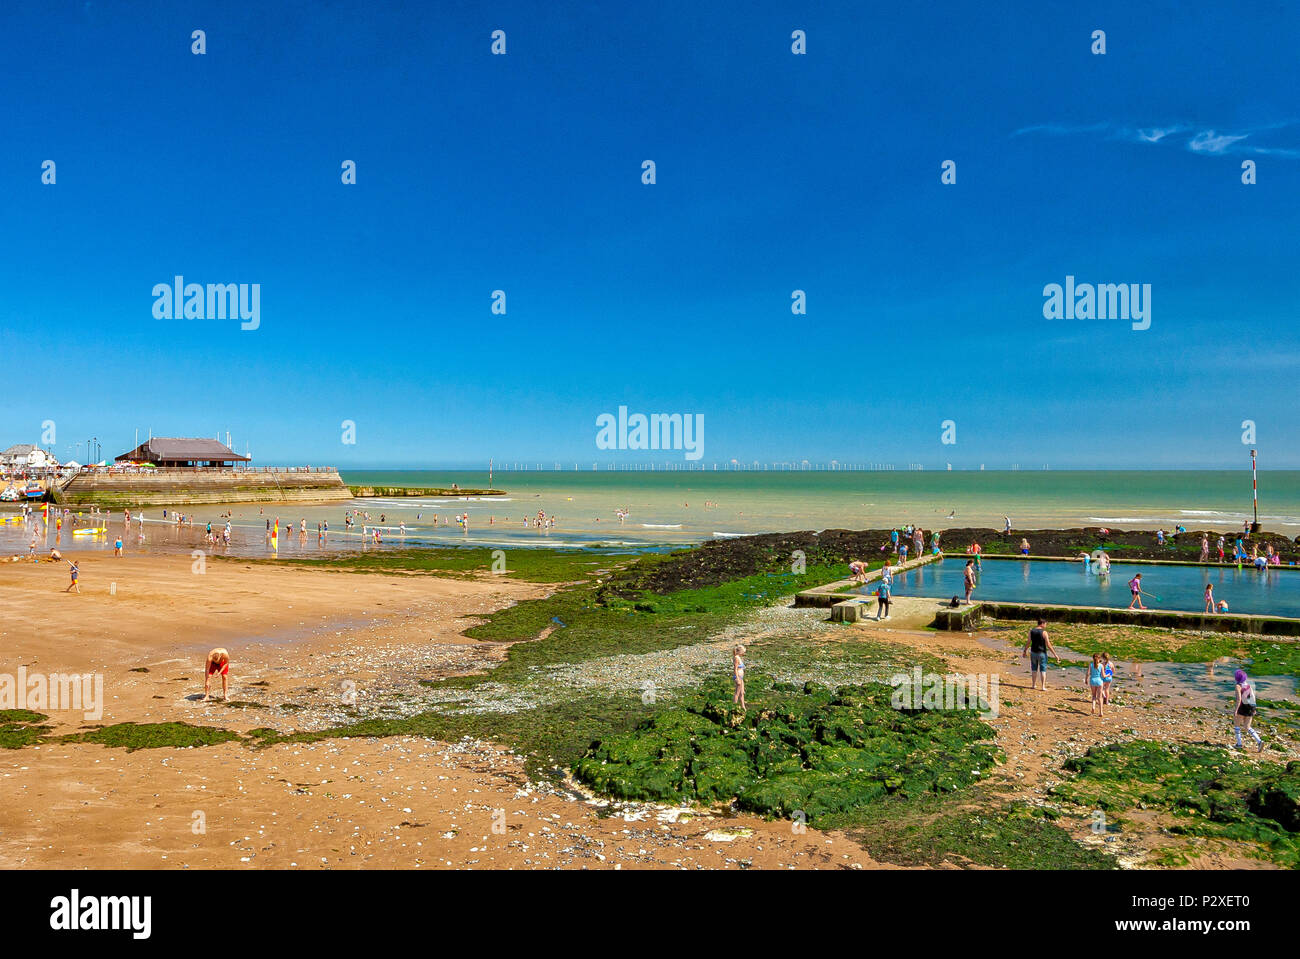 Children and families playing on beach and in lido at Viking bay, Broadstairs, kent, England Stock Photo